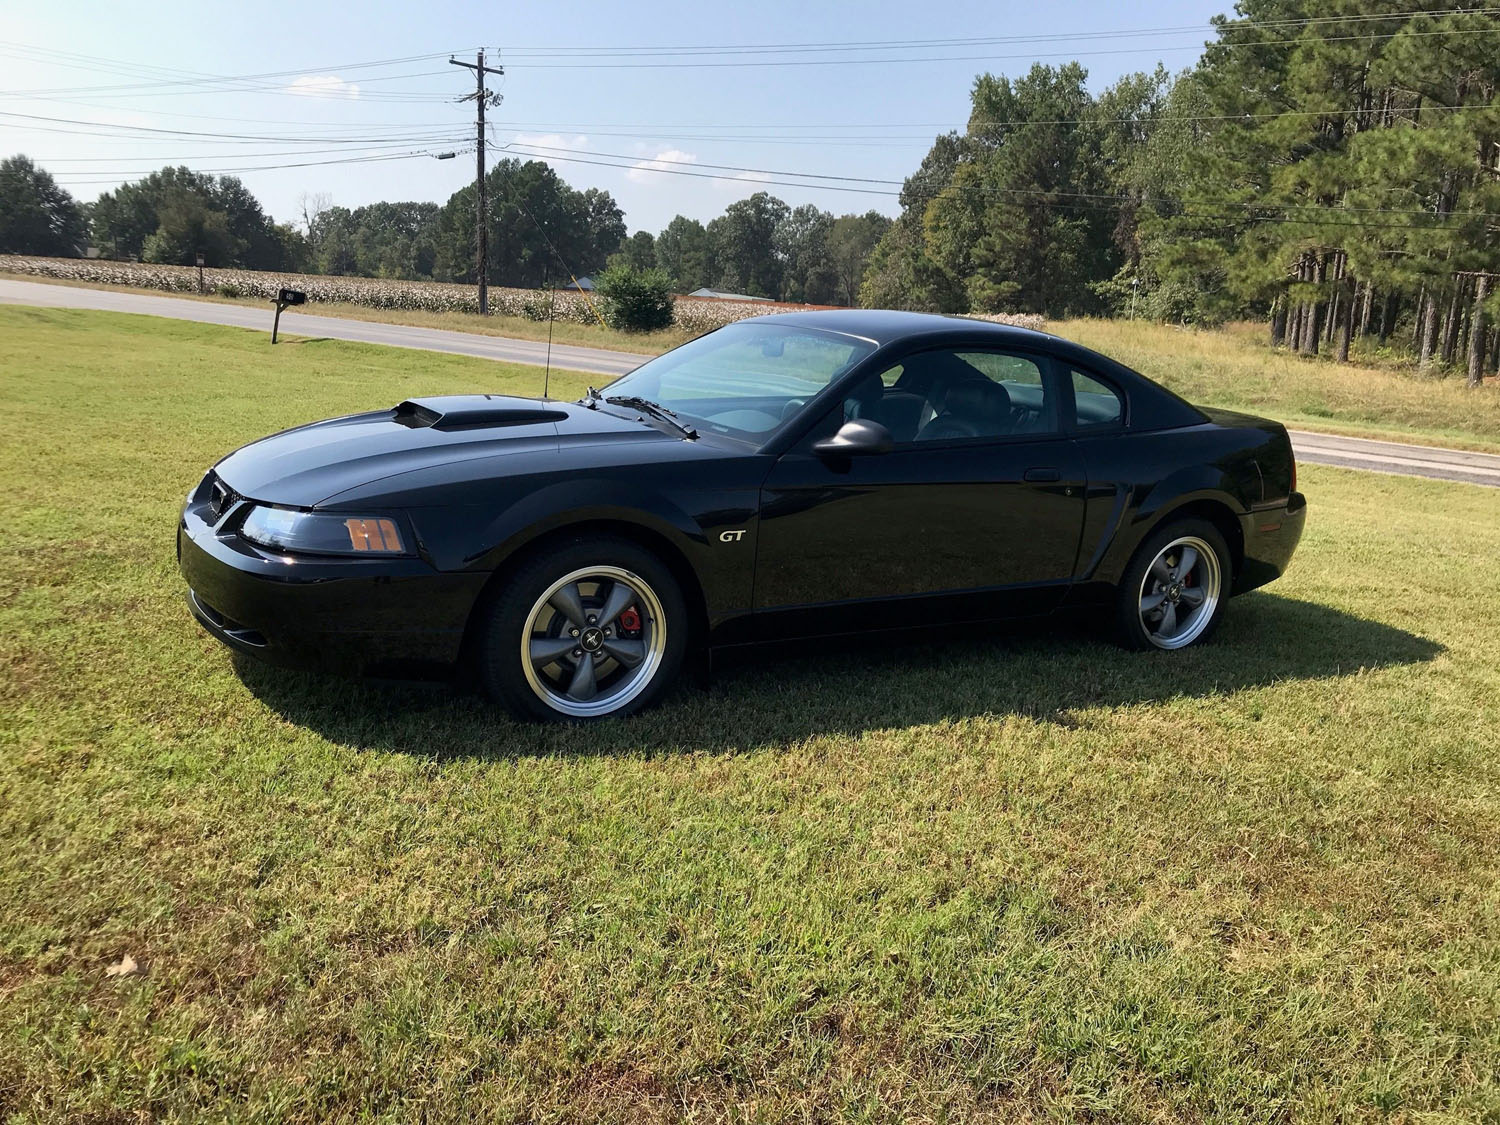 2001 Ford Mustang Bullitt Has Only 4,800 Miles Since New